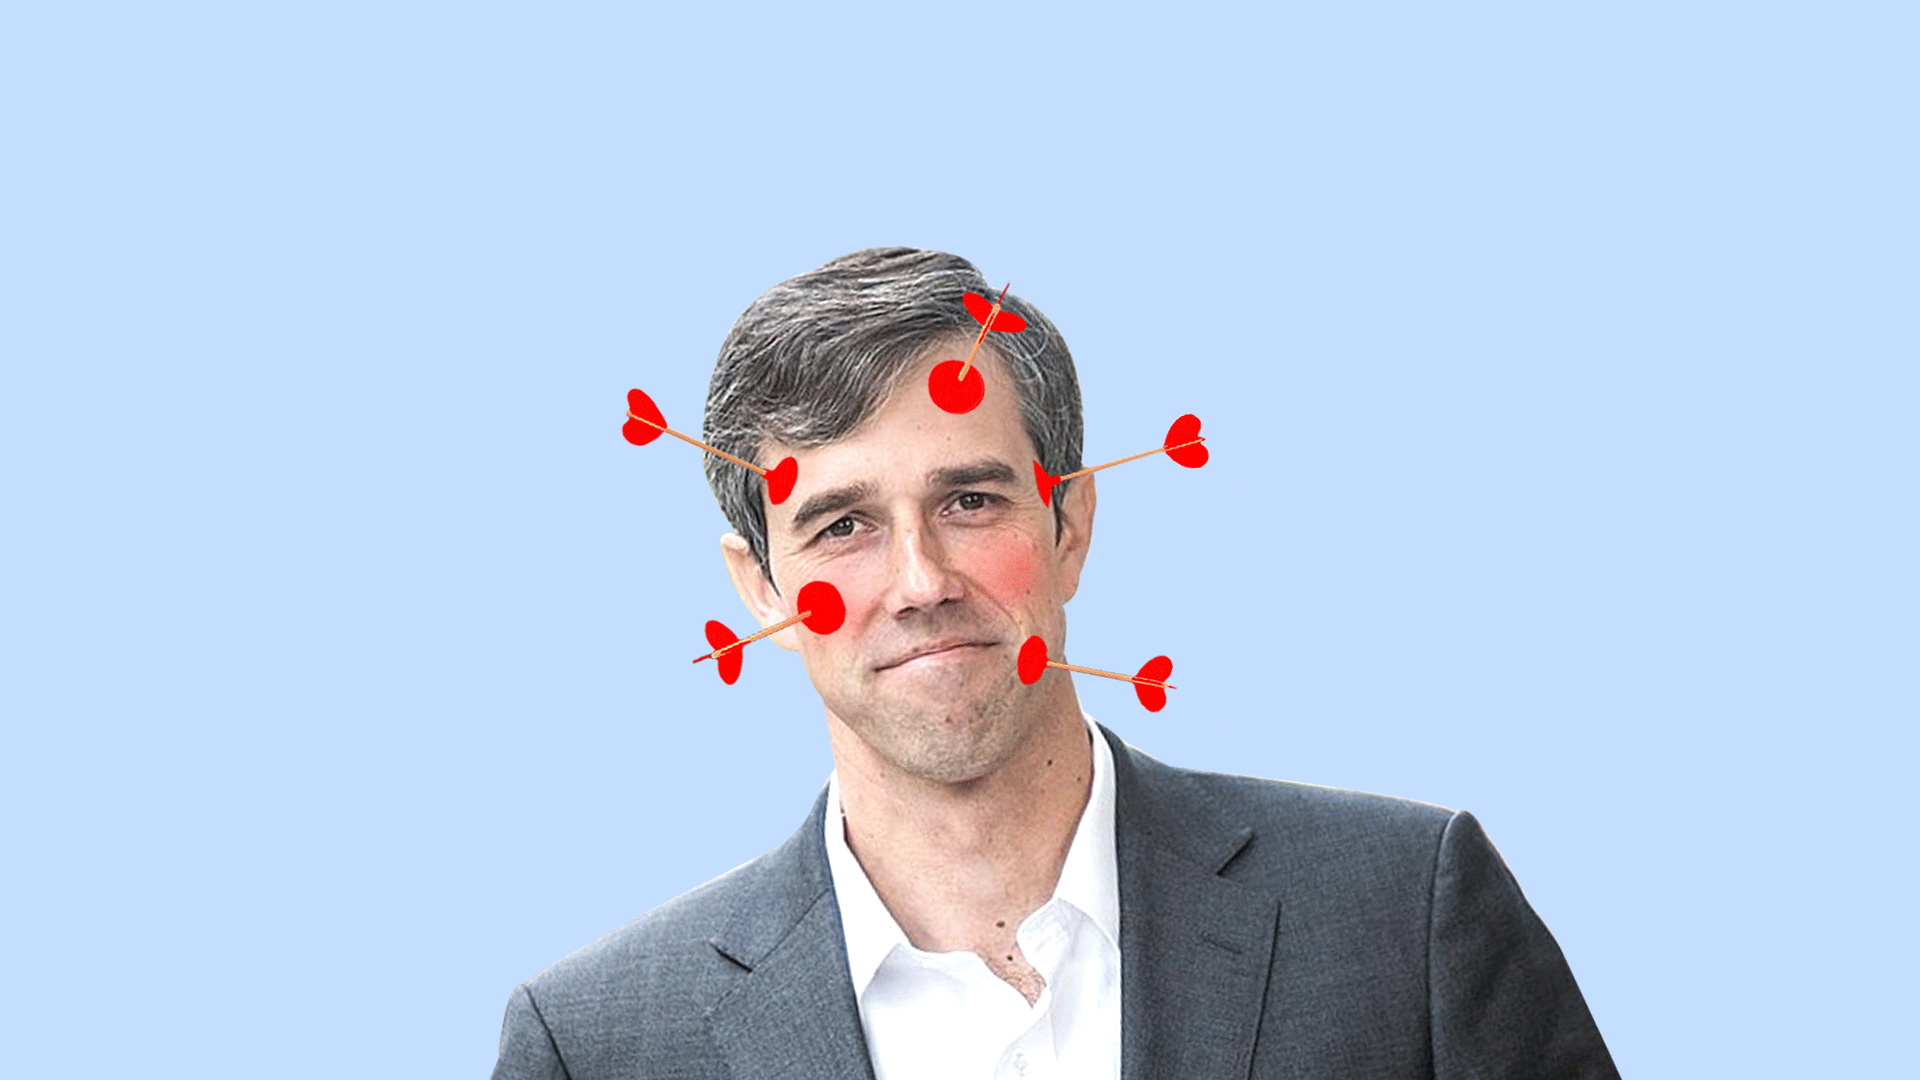 Illustration of Beto O'Rourke with an instagram filter